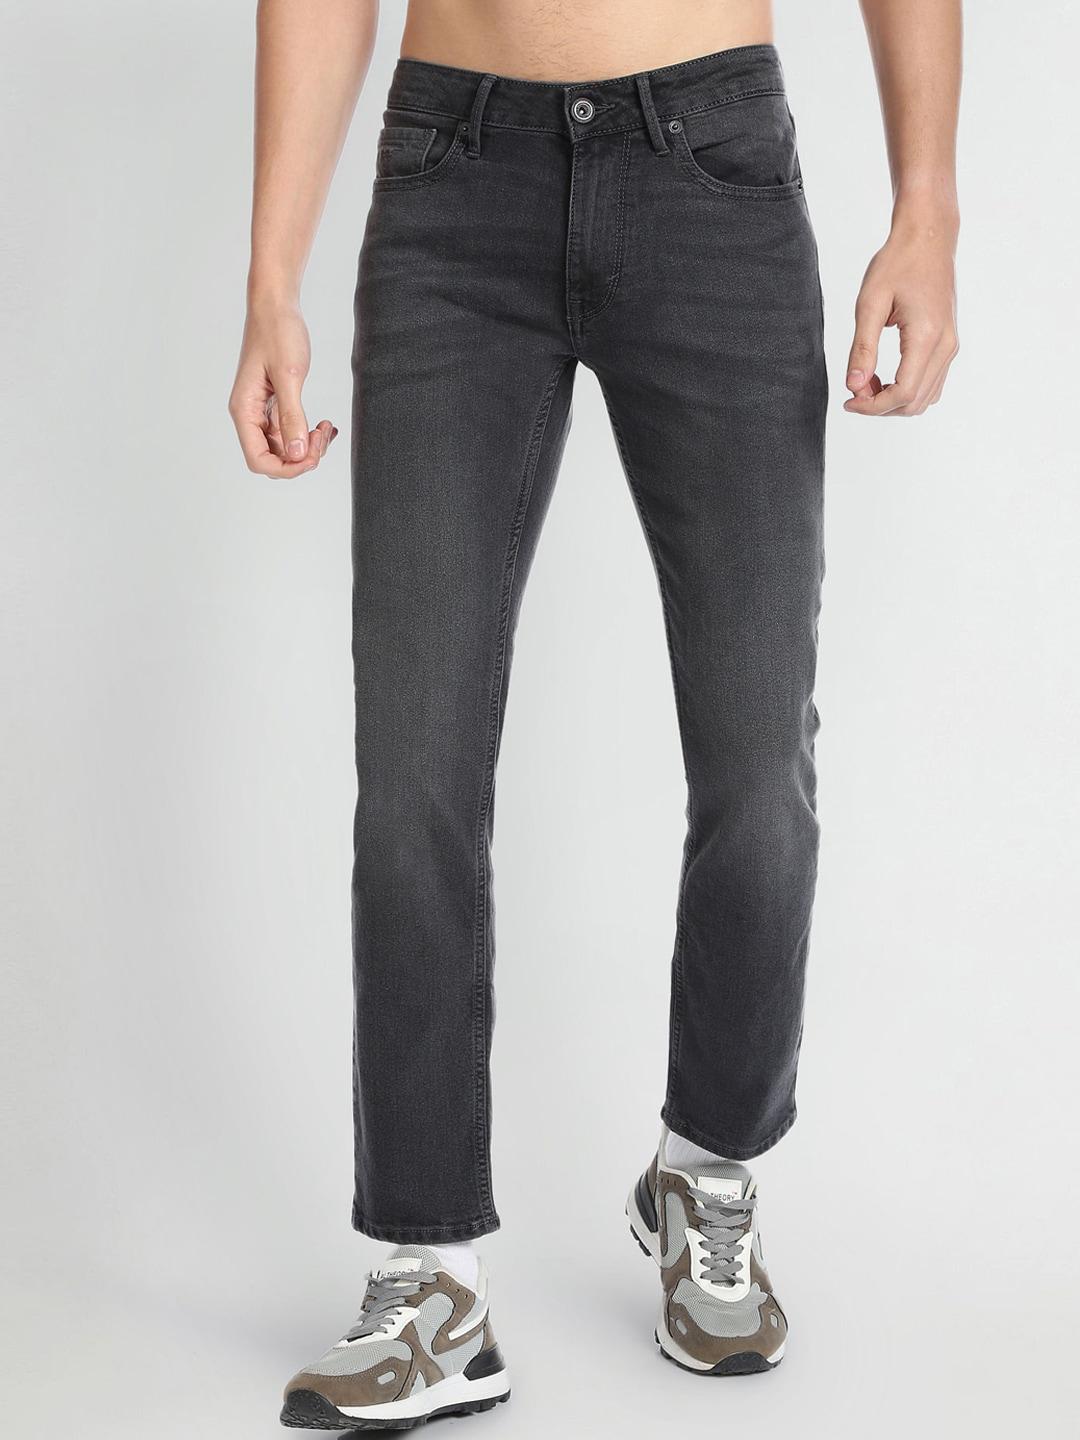 flying-machine-men-tapered-fit-clean-look-light-fade-stretchable-jeans